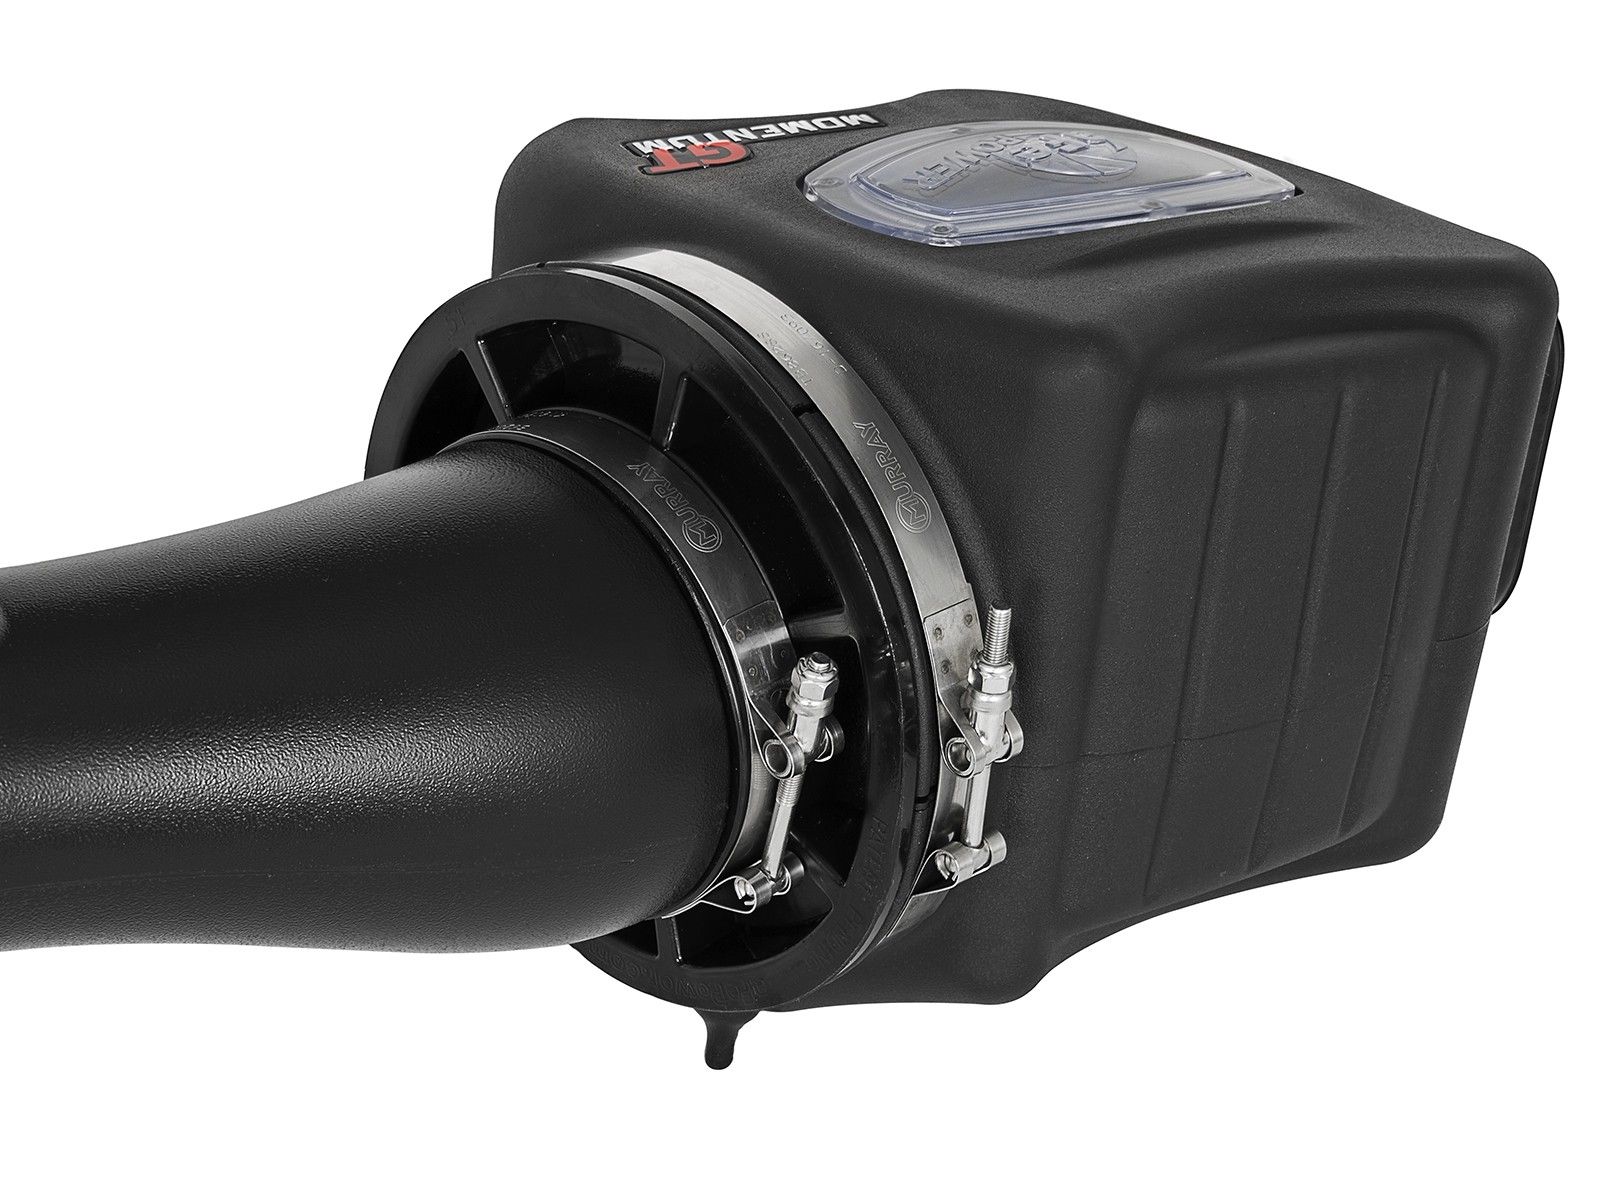 Best Cold Air Intake For Gmc Yukon